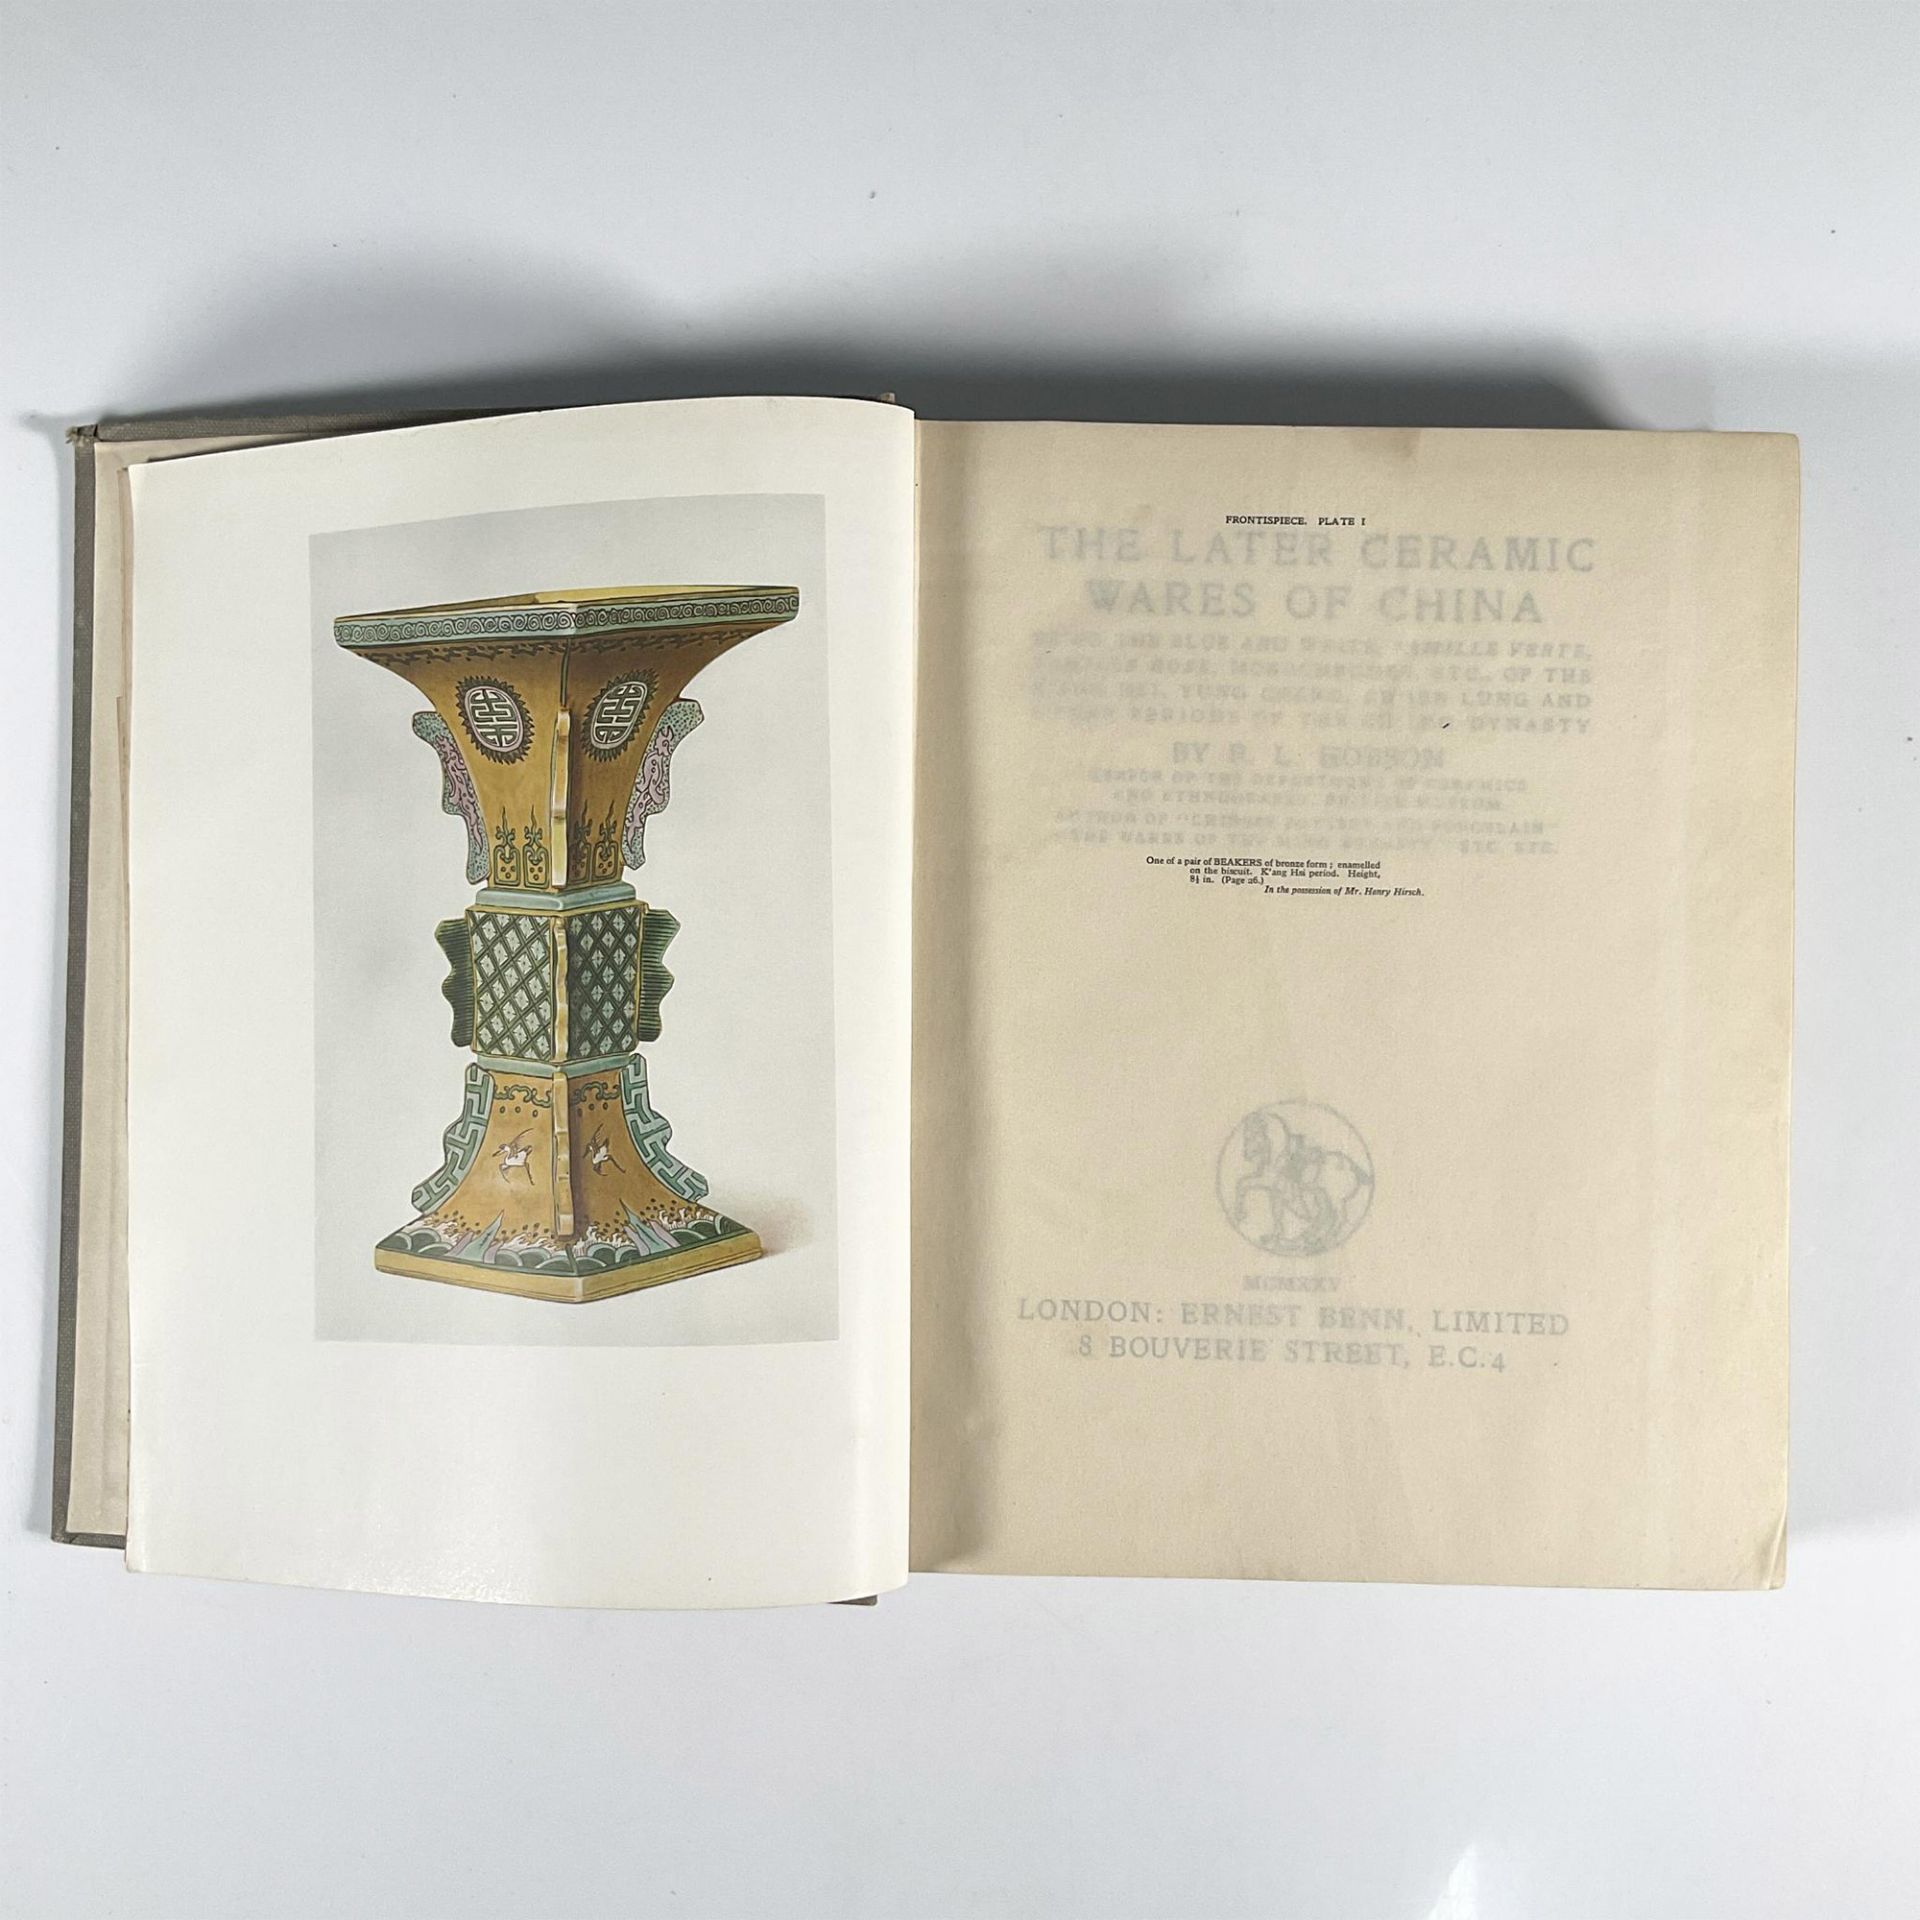 1st Edition, The Later Ceramic Ware of China, Book by Hobson - Image 2 of 3